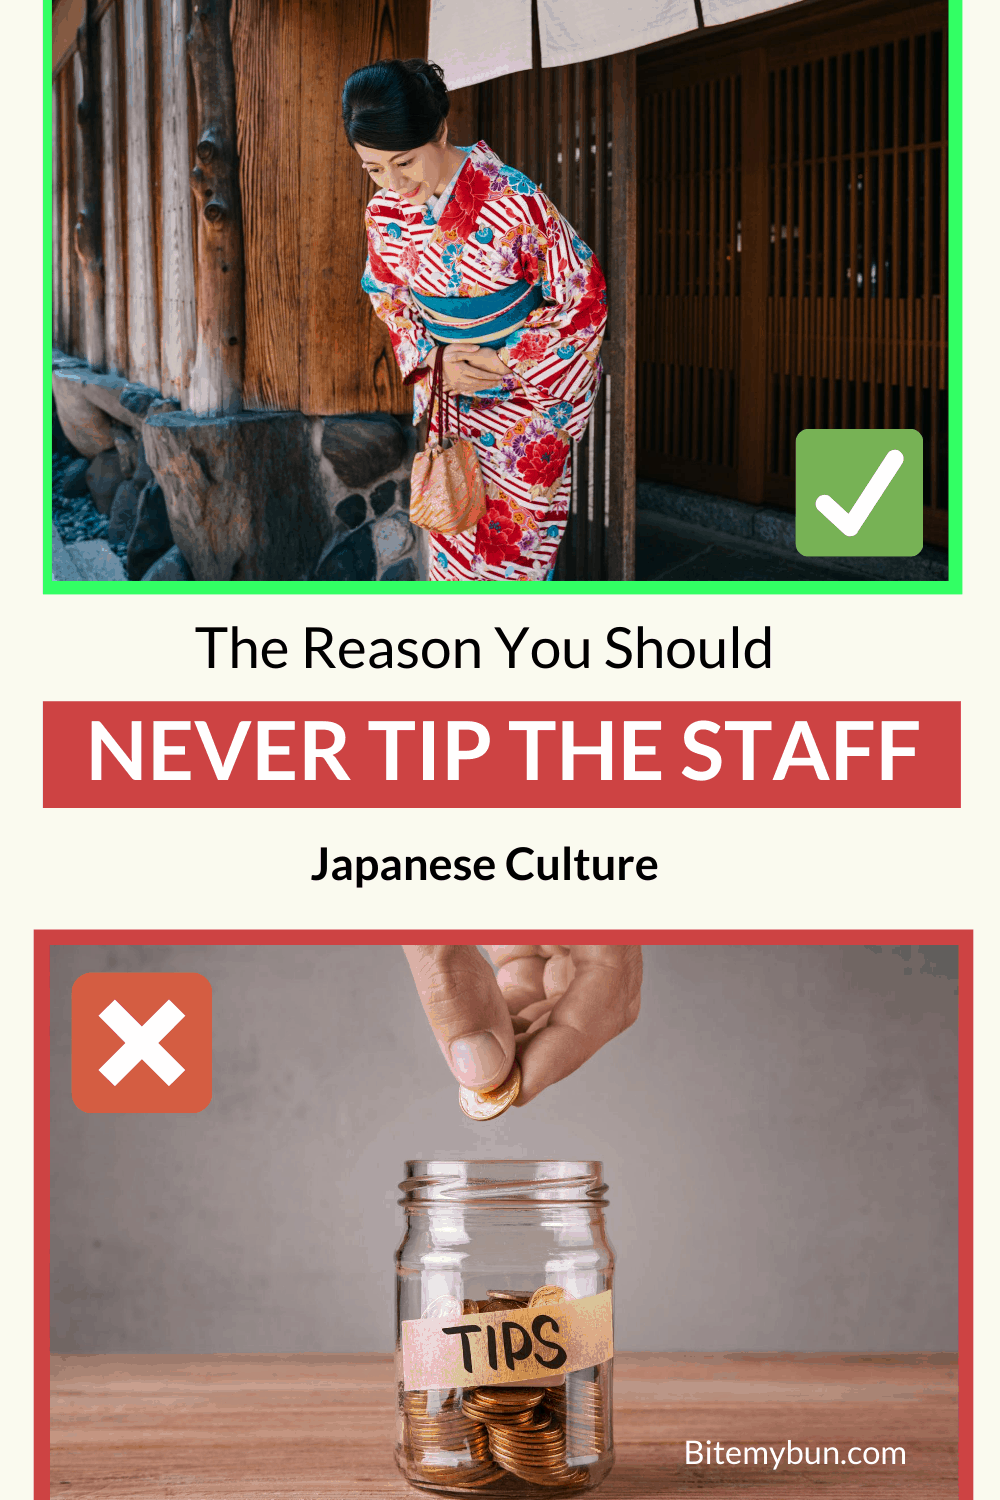 Japanese culture on tips